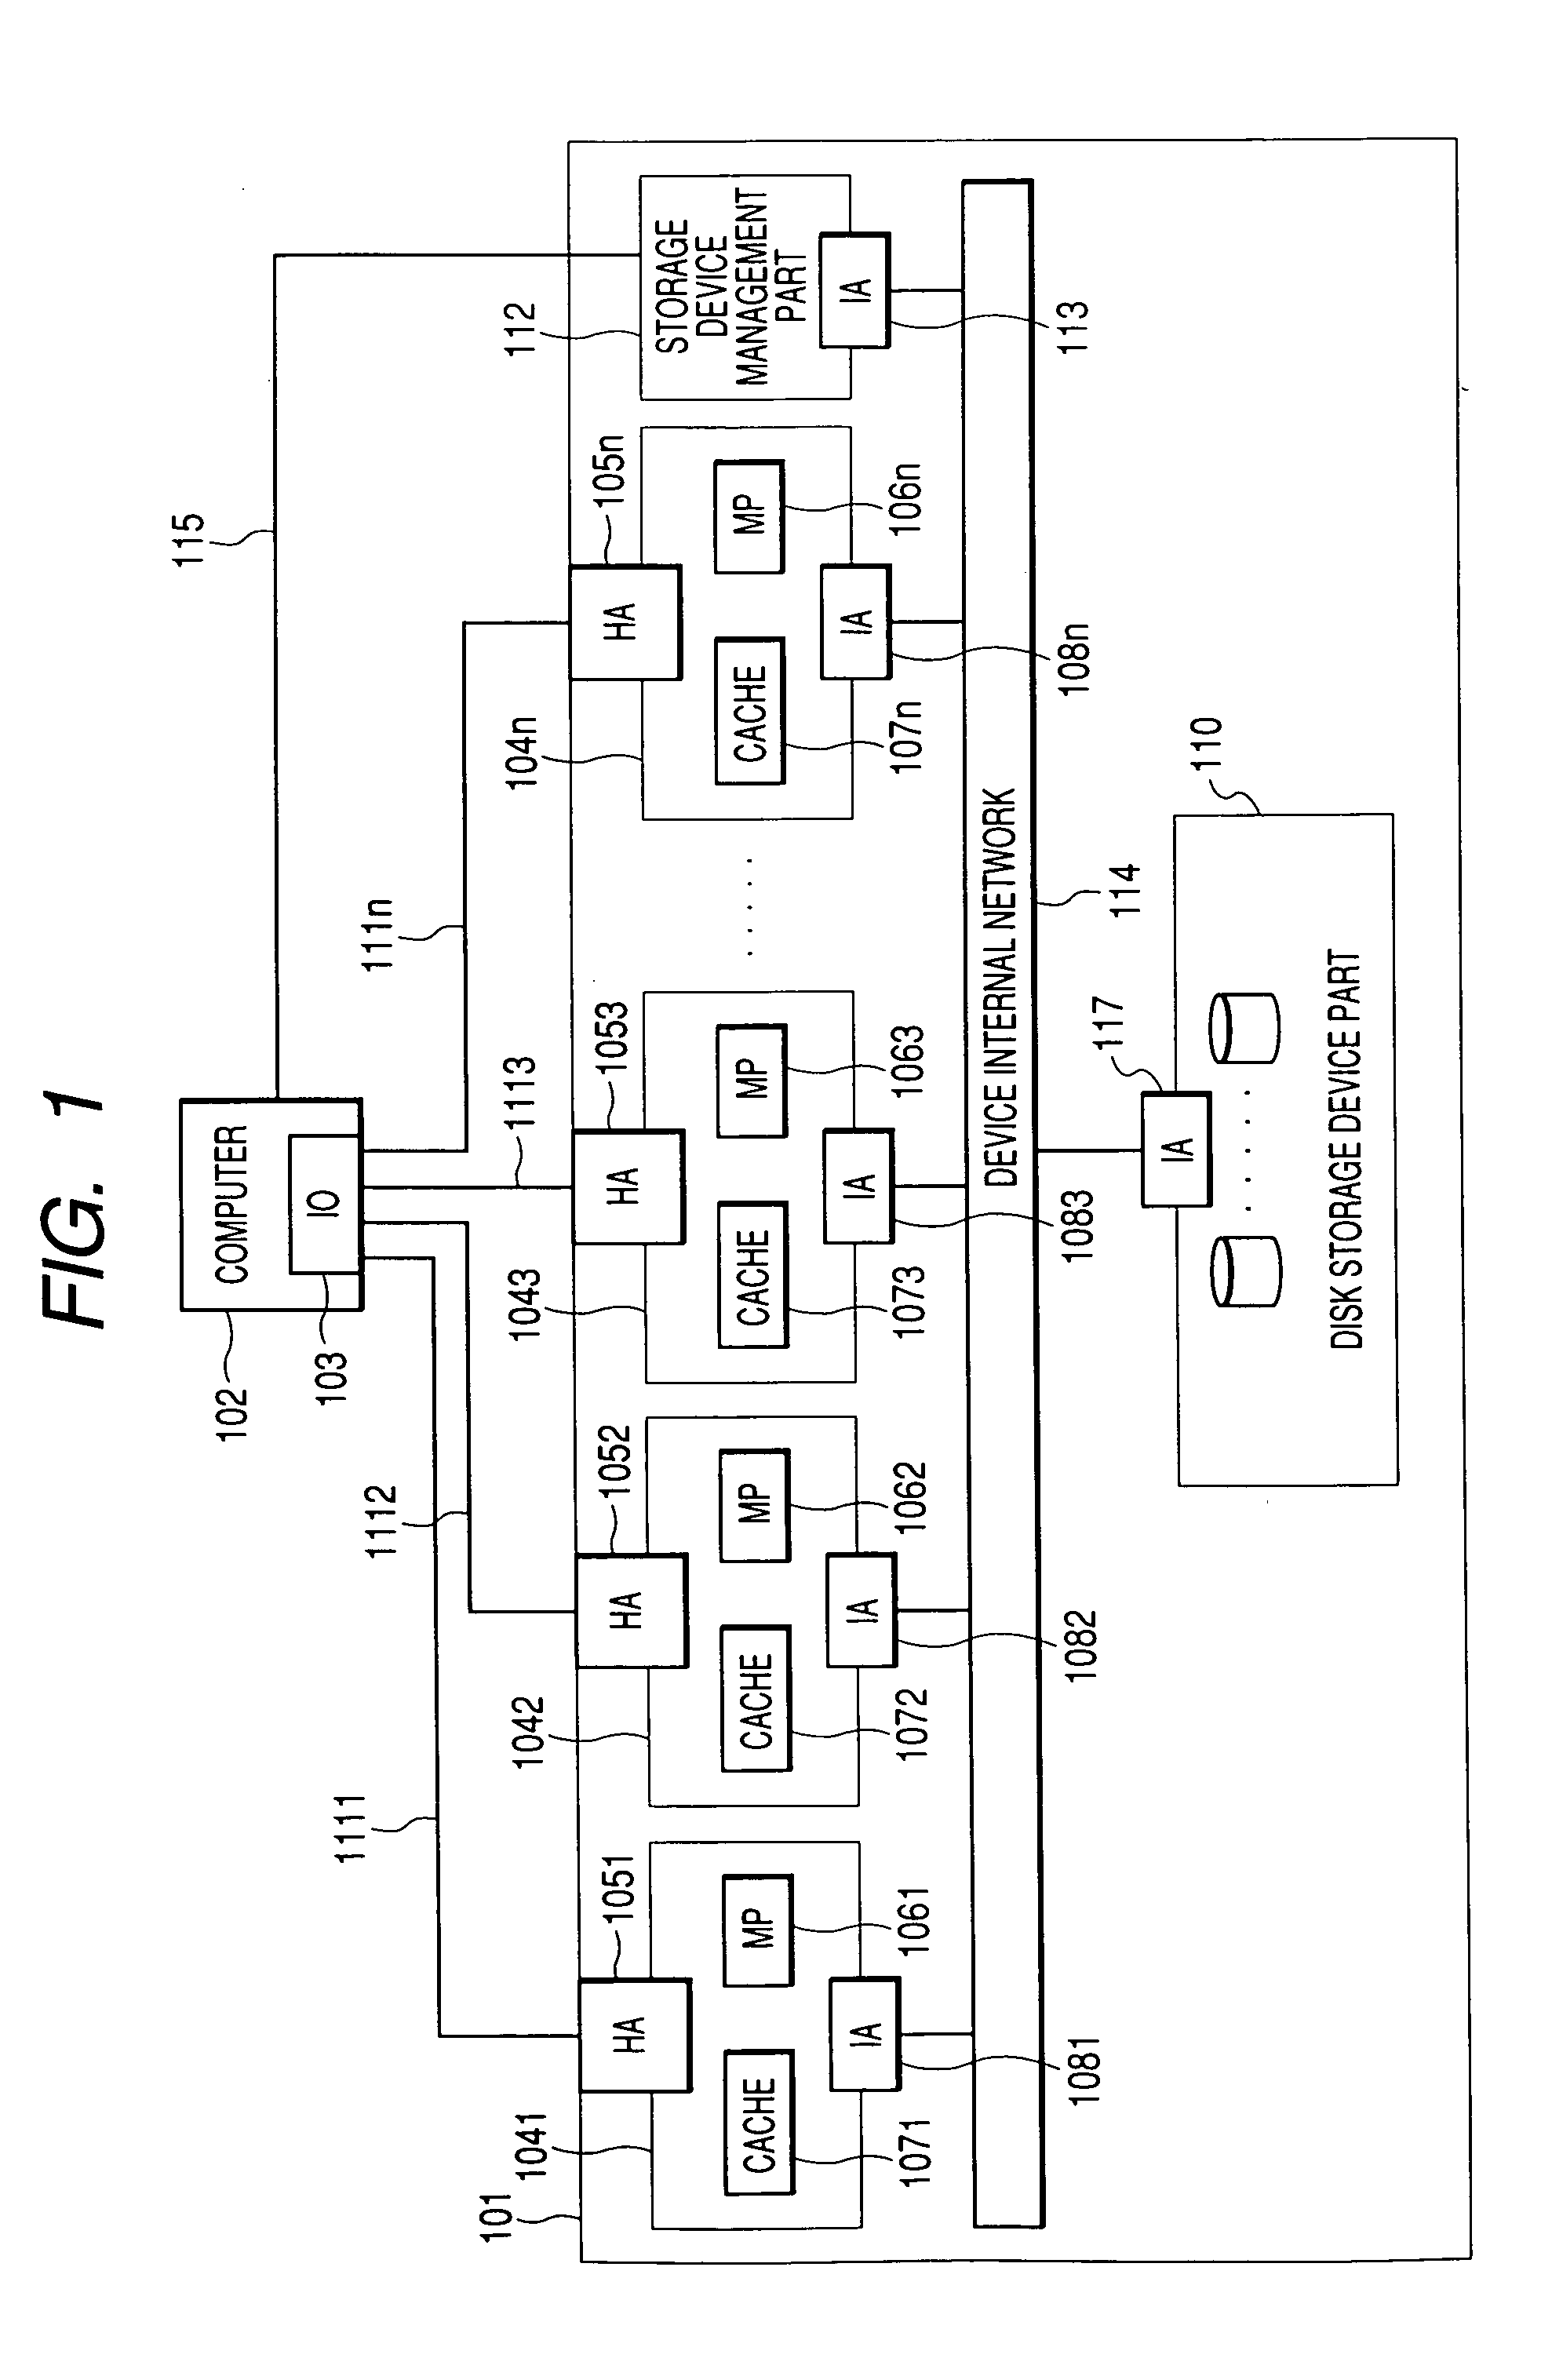 Cache control method in a storage system with multiple disk controllers